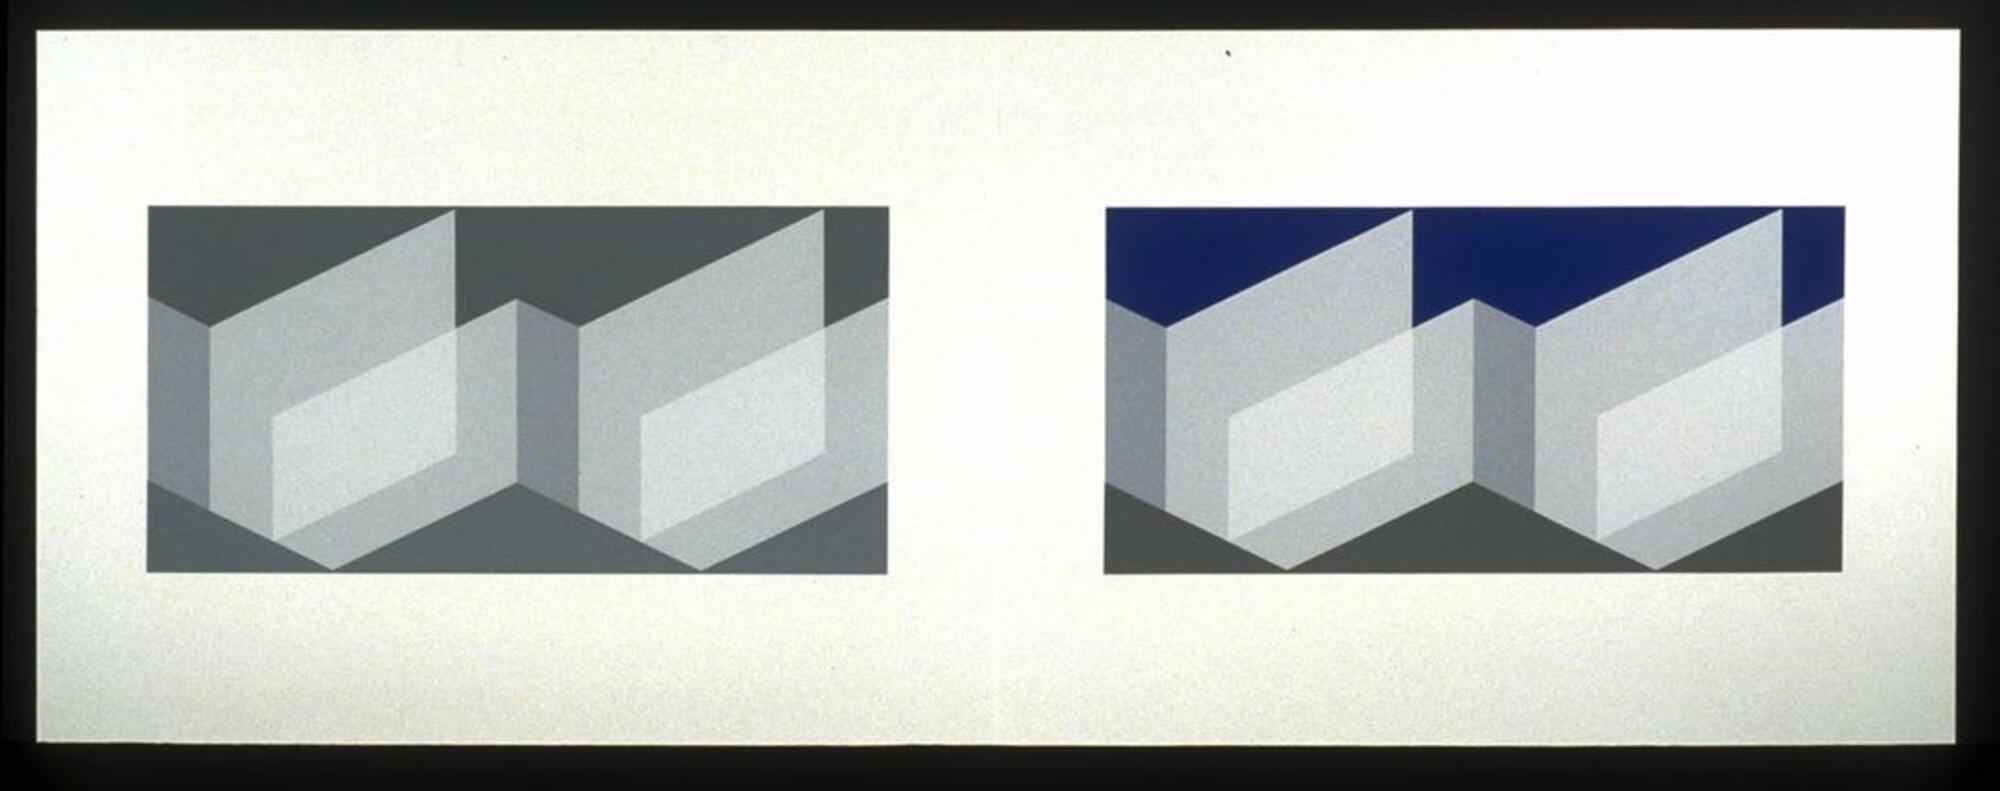 On a long white horizontal piece of paper are two rectangles. On the left the rectangle is in shades of grey and on the right, in shades of blue and grey. Within each are geometric shapes in white that look like vertical boxes. 